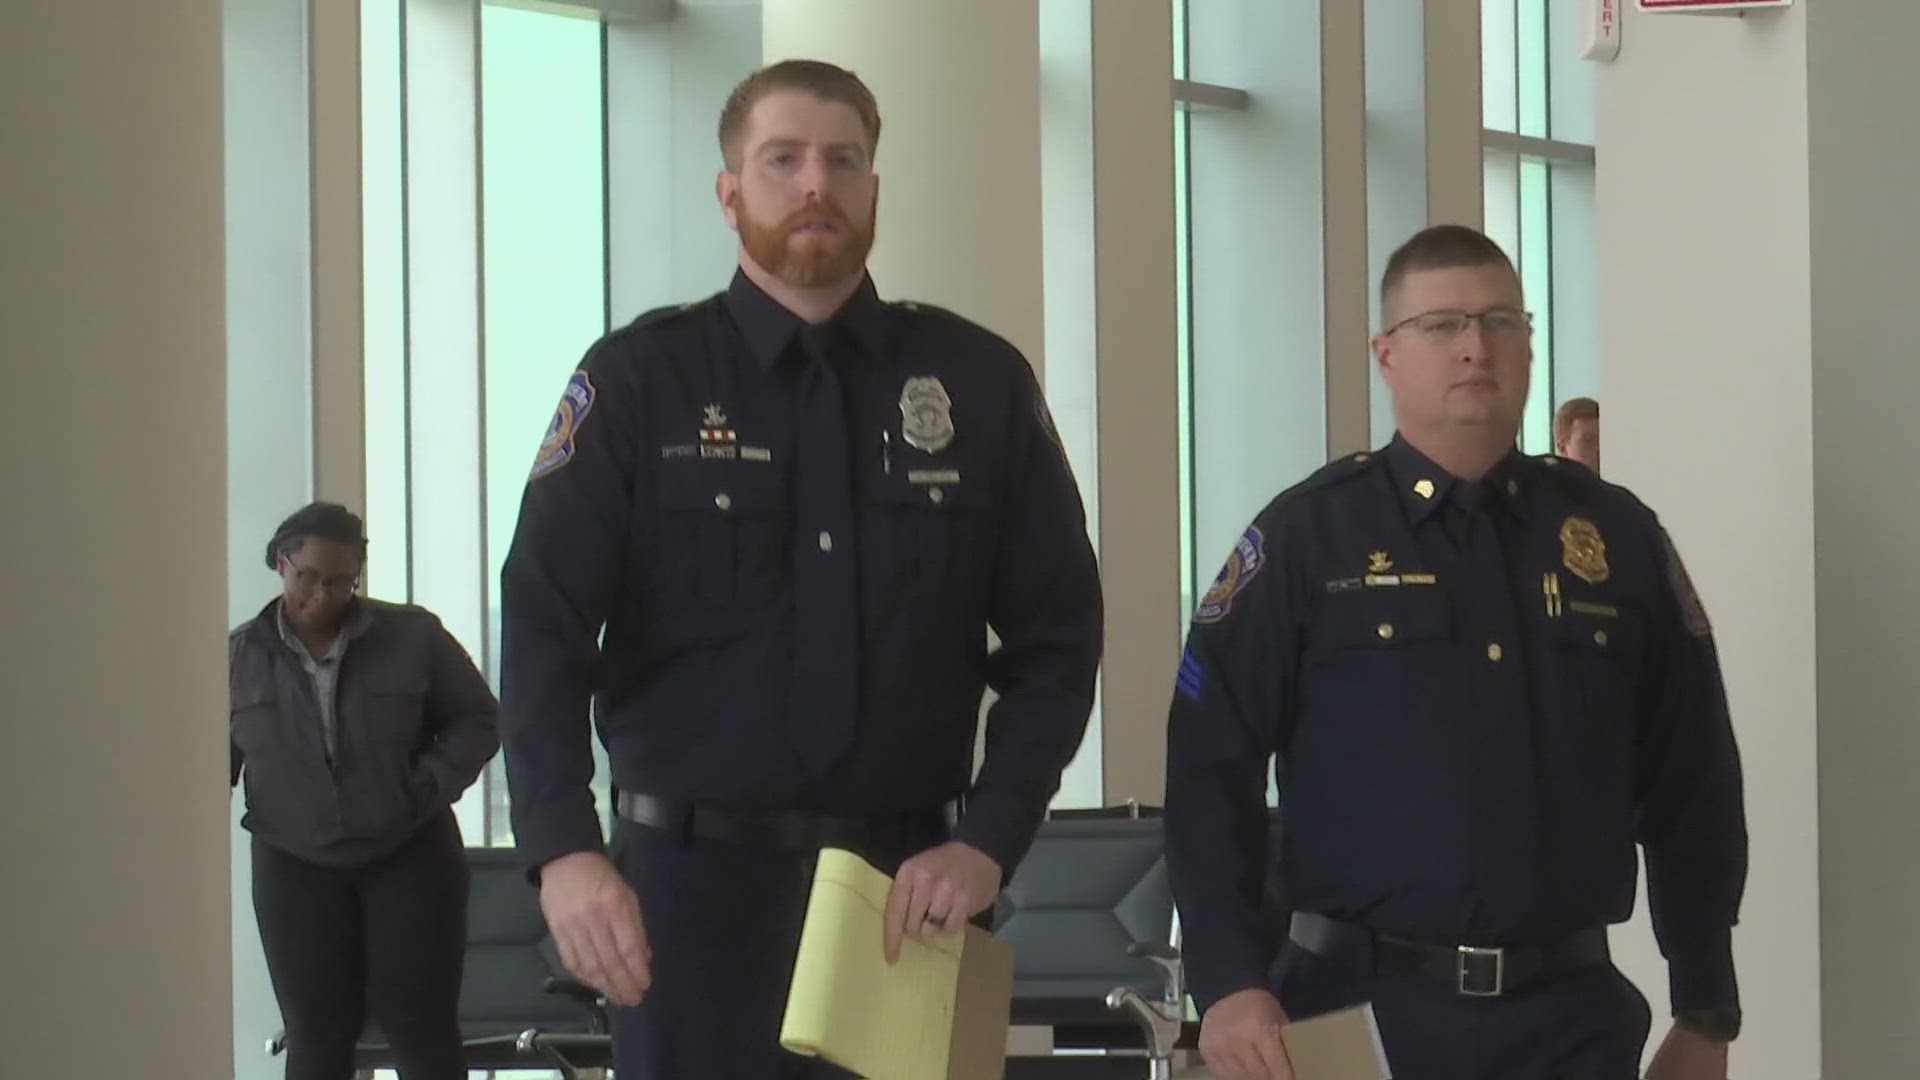 Officers Jonathan Horlock and Nathaniel Schauwecker were found not guilty on four of the six charges they faced.